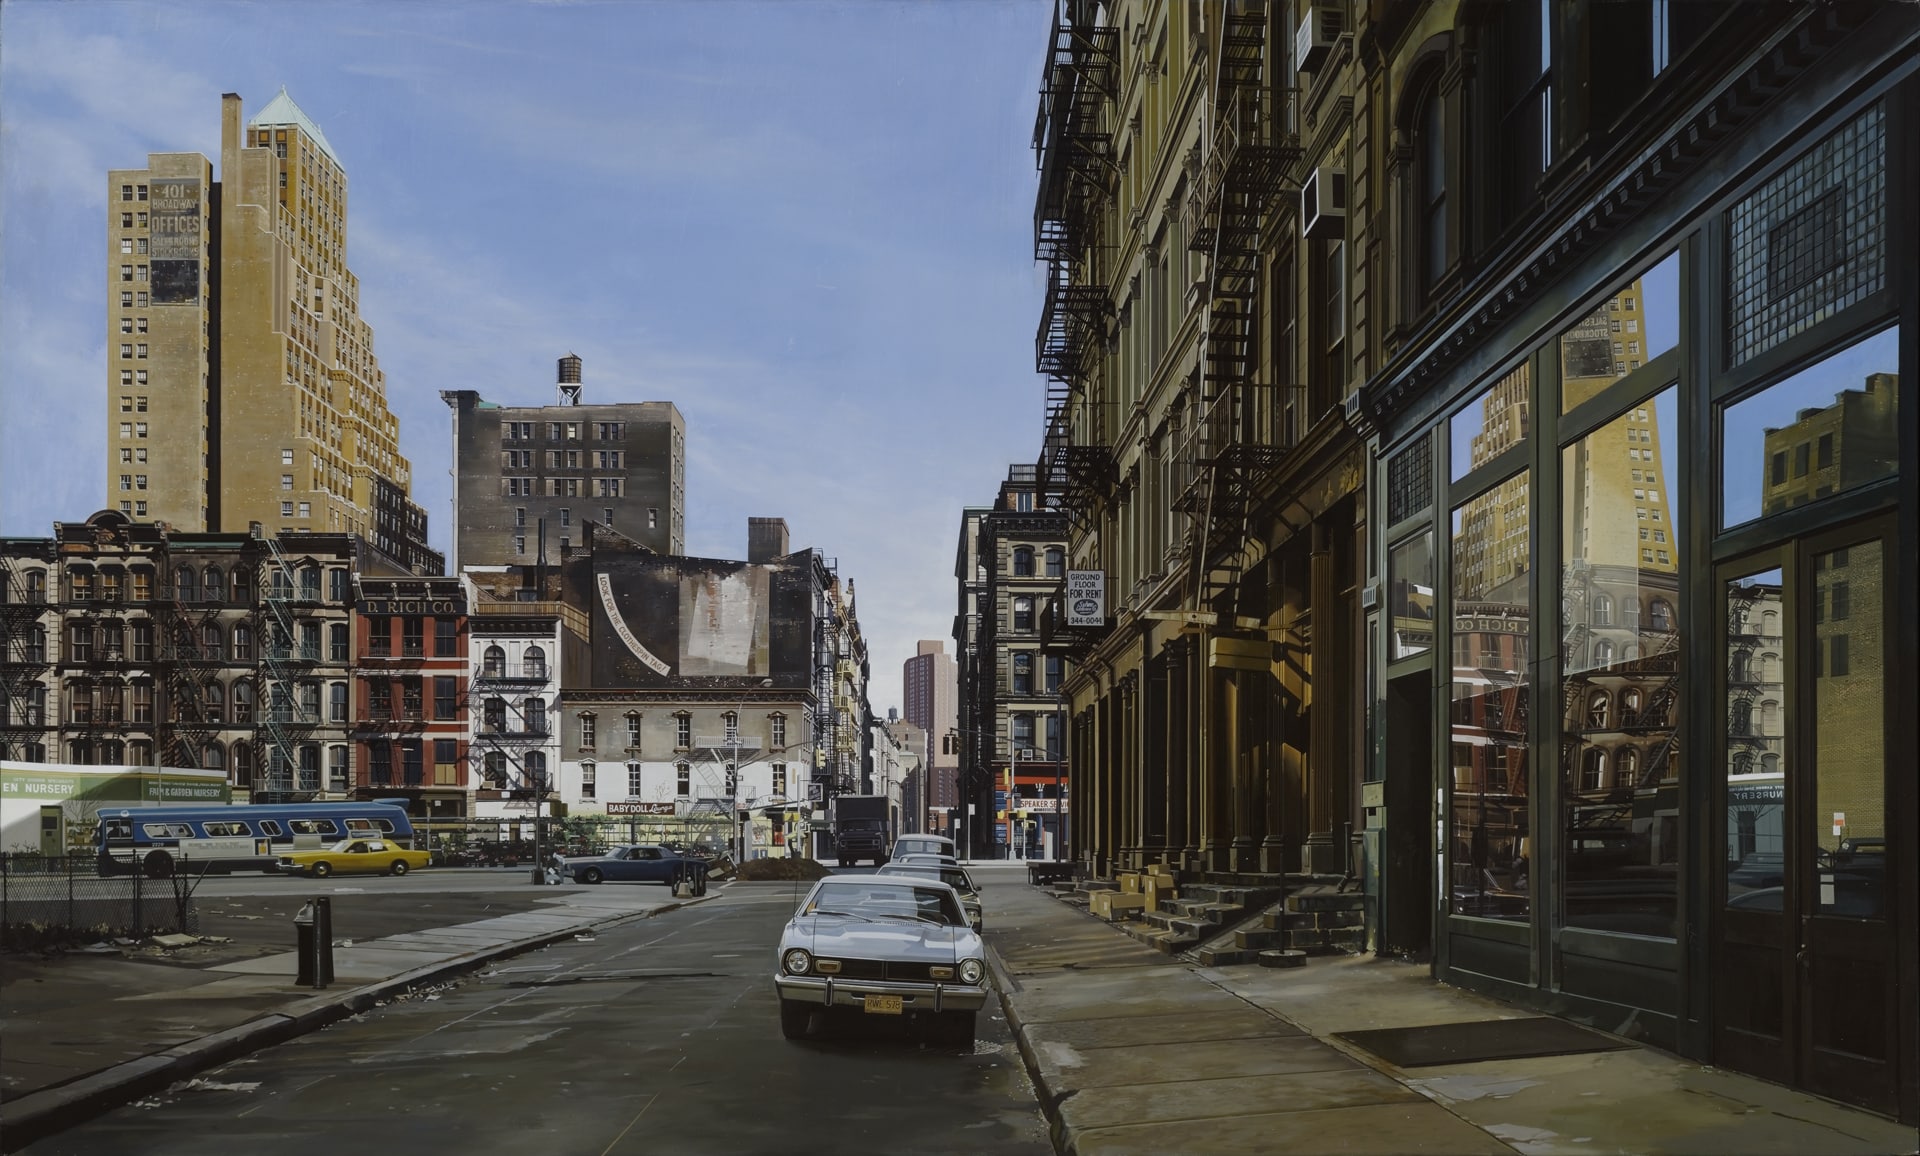 a photorealistic painting of a street scene in new york city